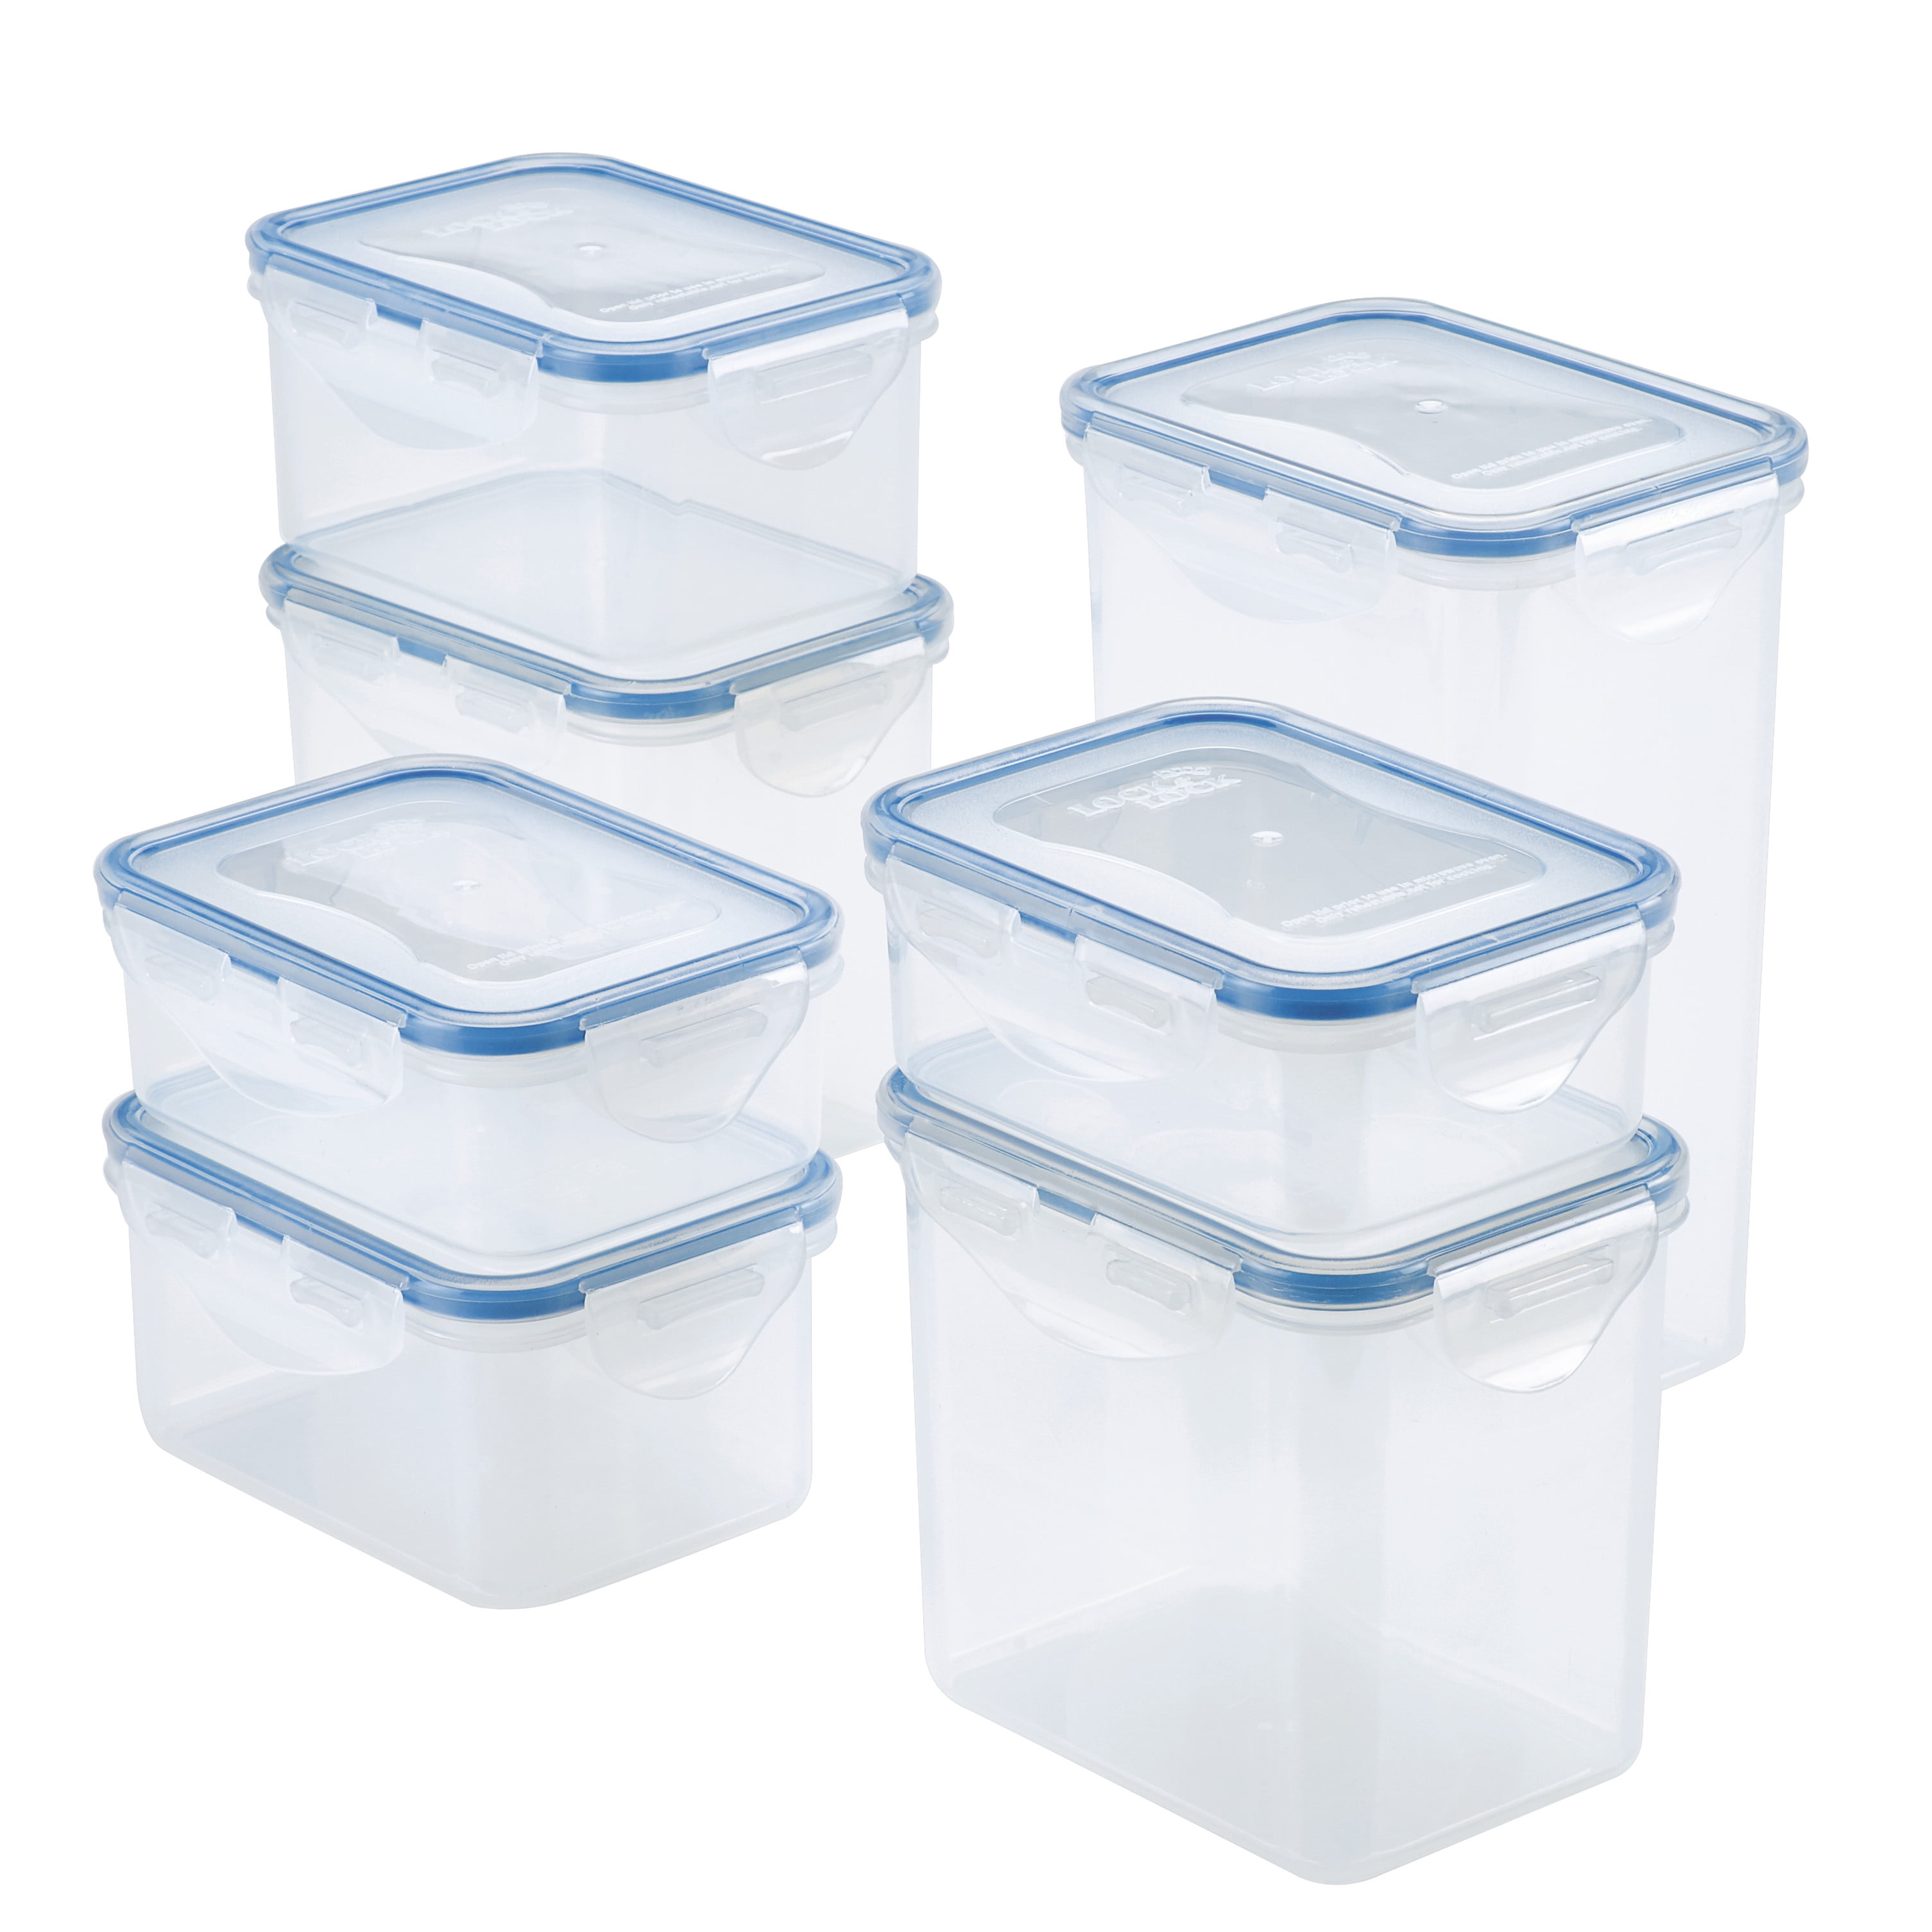 LIHONG Large Food Storage Containers with Lids Airtight, 14-Piece Plastic  Storage Containers Meal Prep Containers Black Gasket